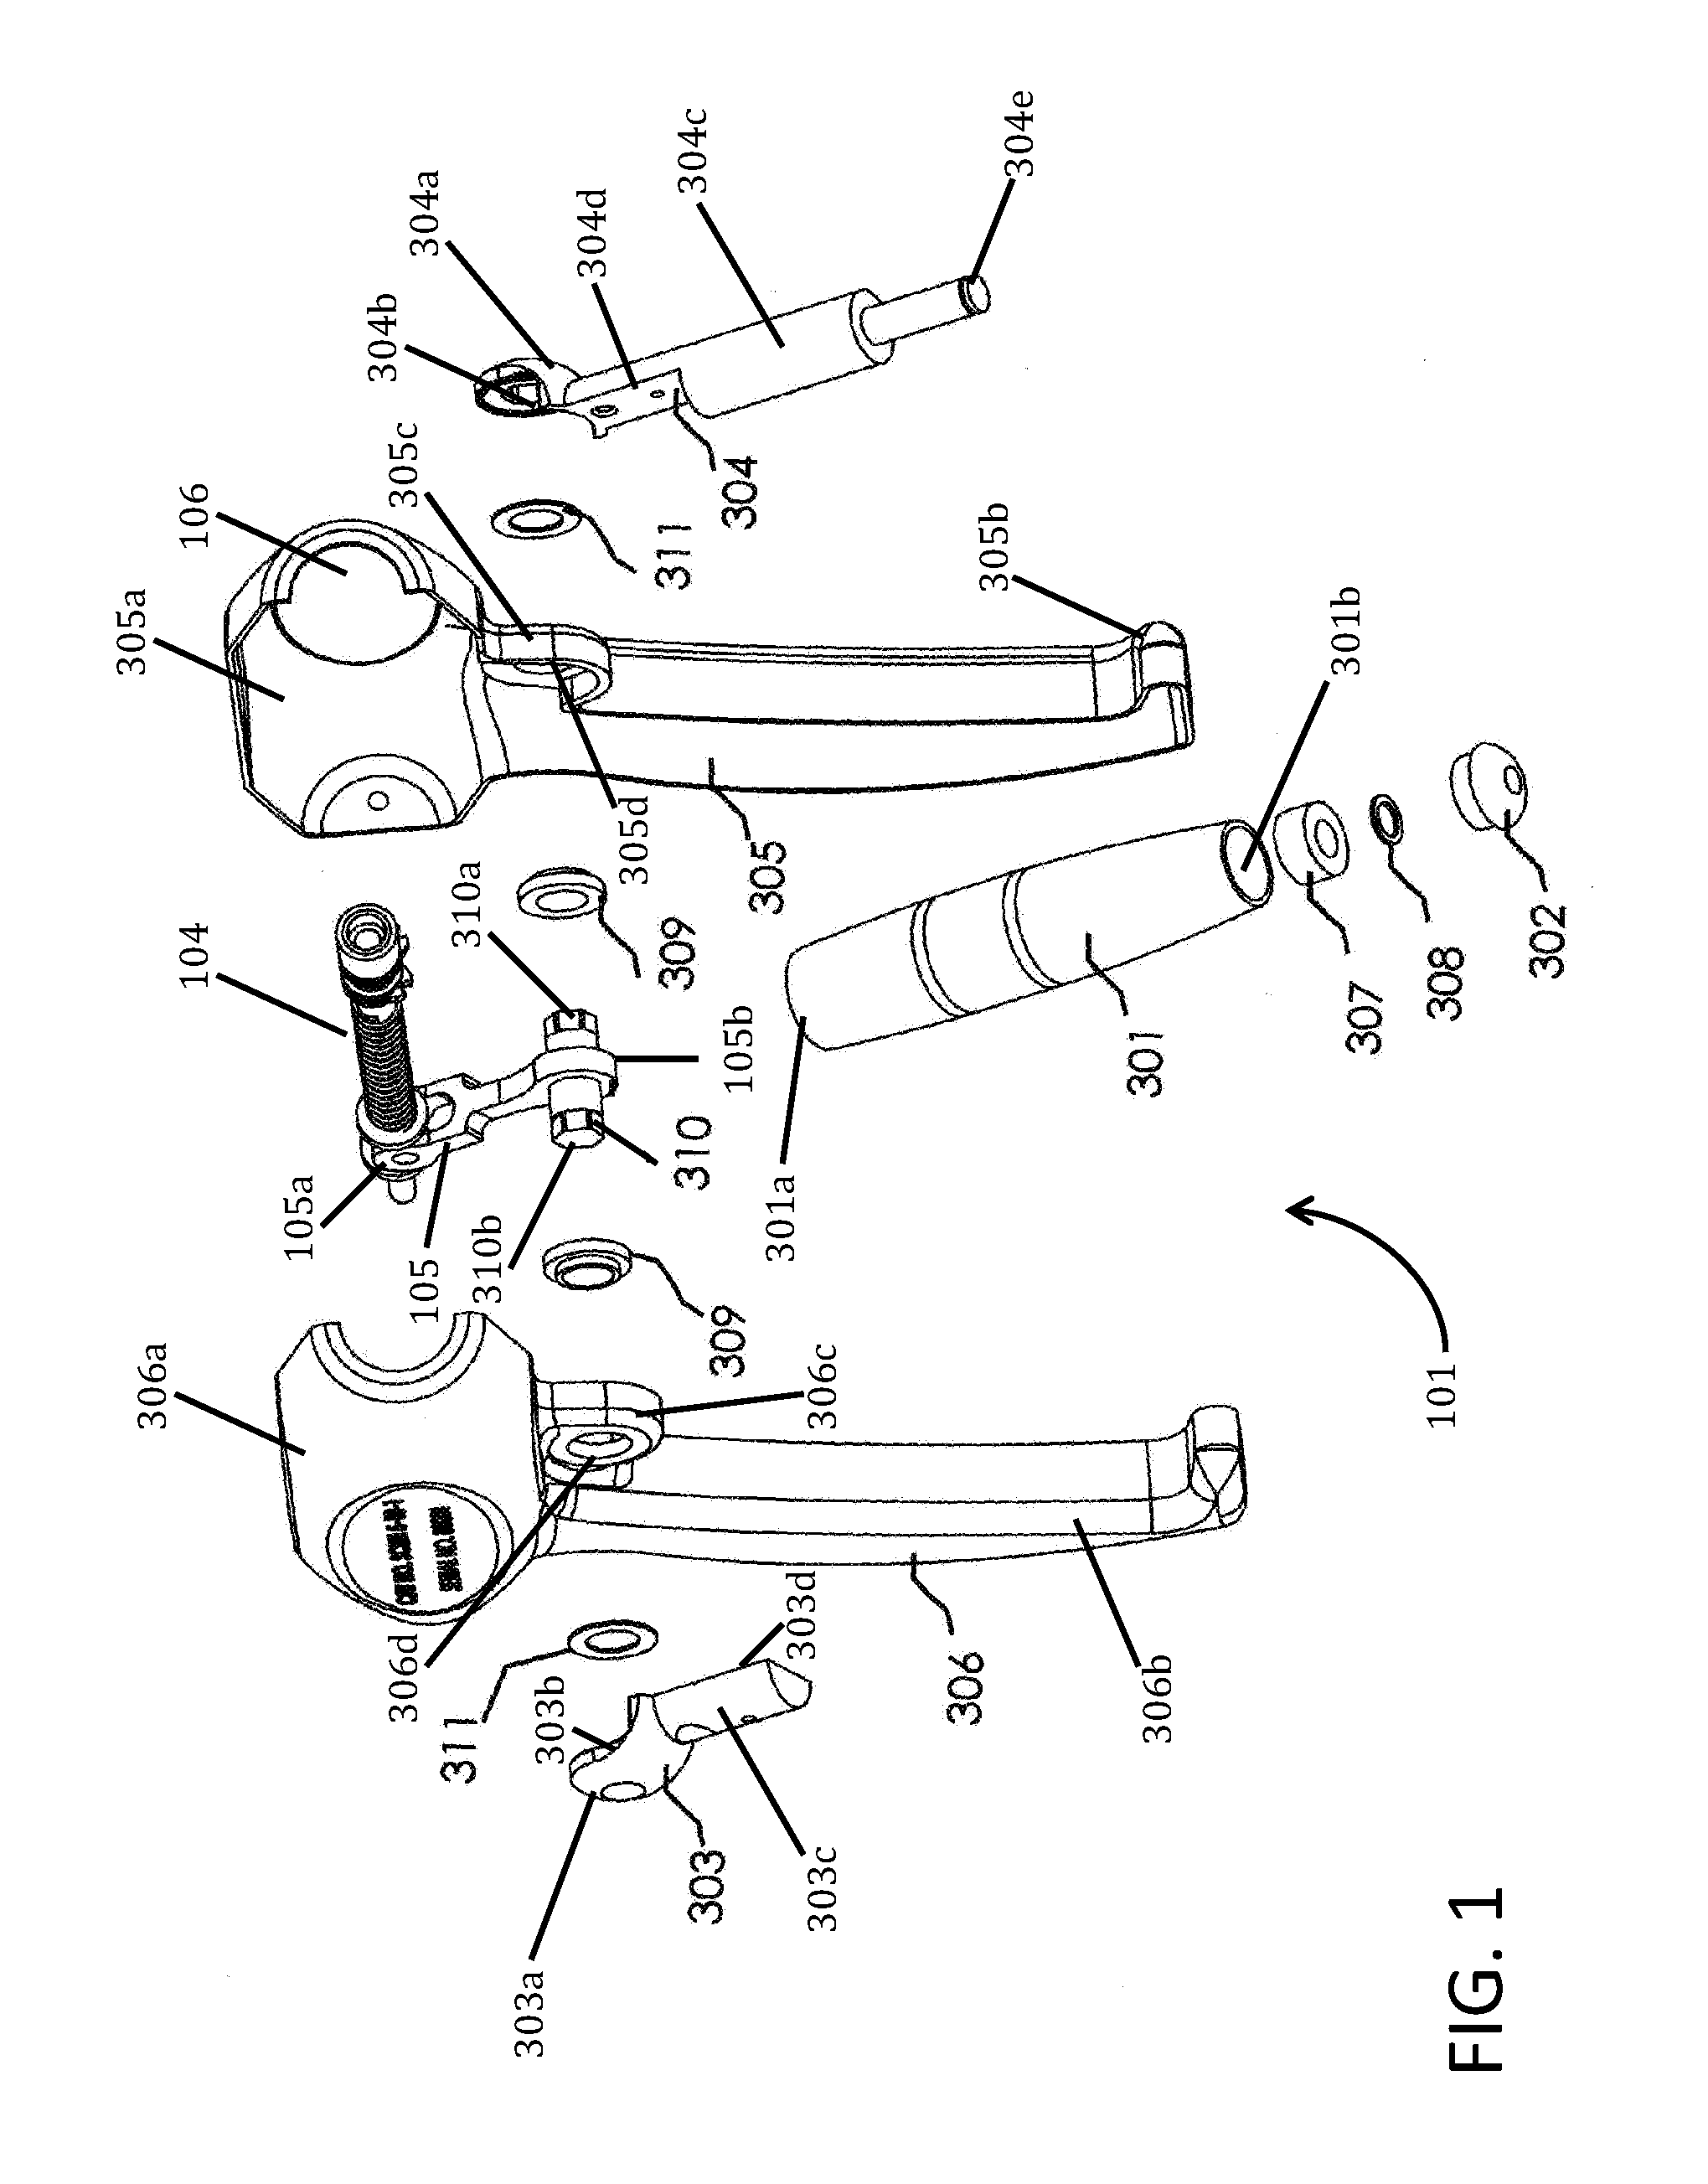 Hermetic Rotating Handle Assembly for a Surgical Clip Applier for Laparoscopic Procedures